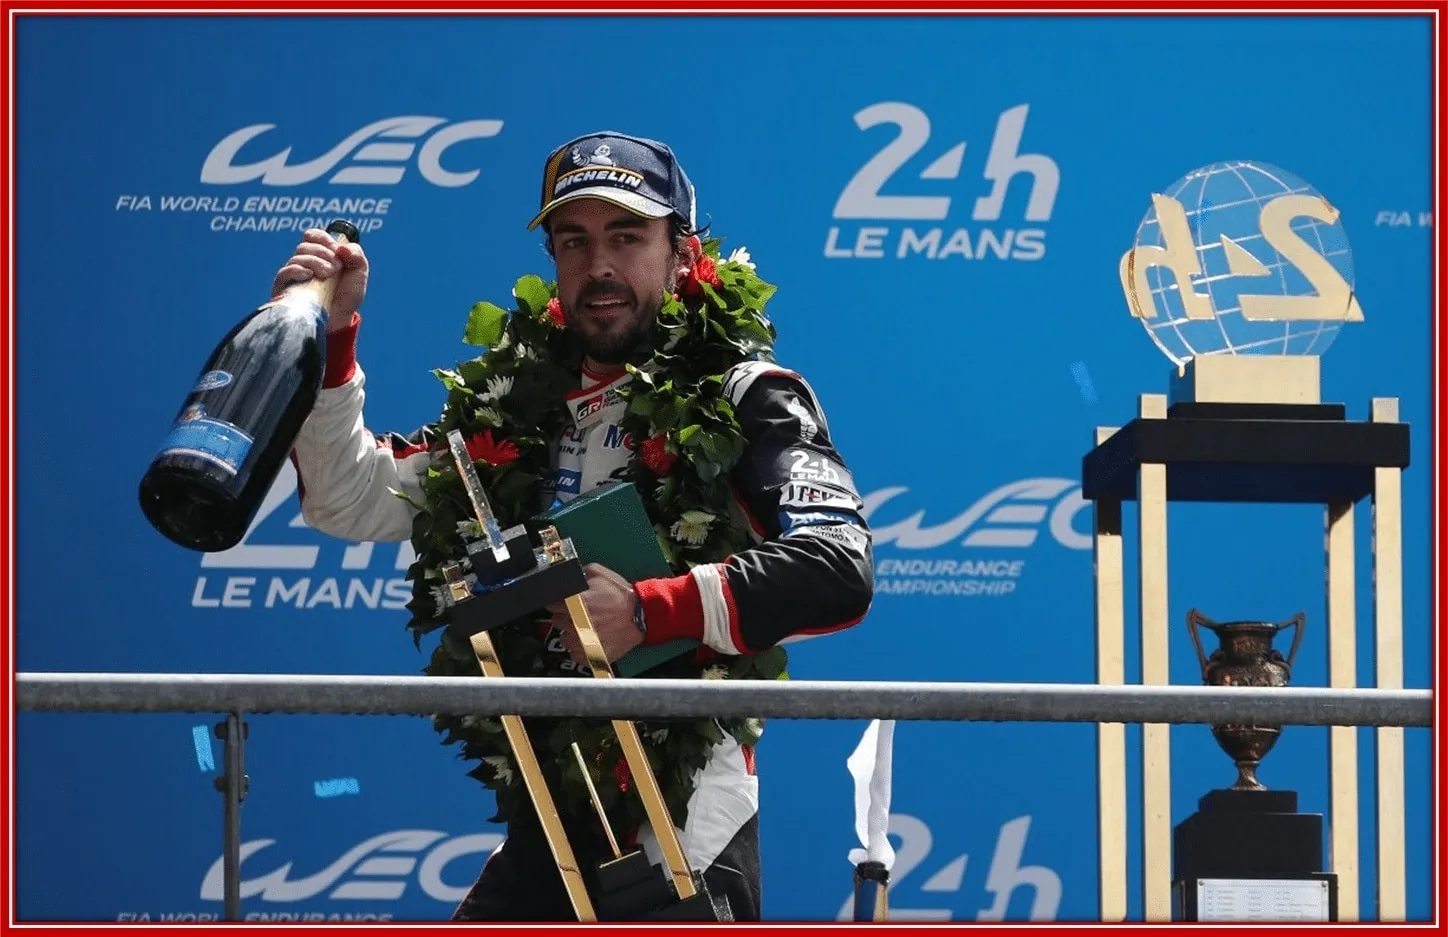 Alonso emerged victorious at the 24 Hours of Le Mans twice.